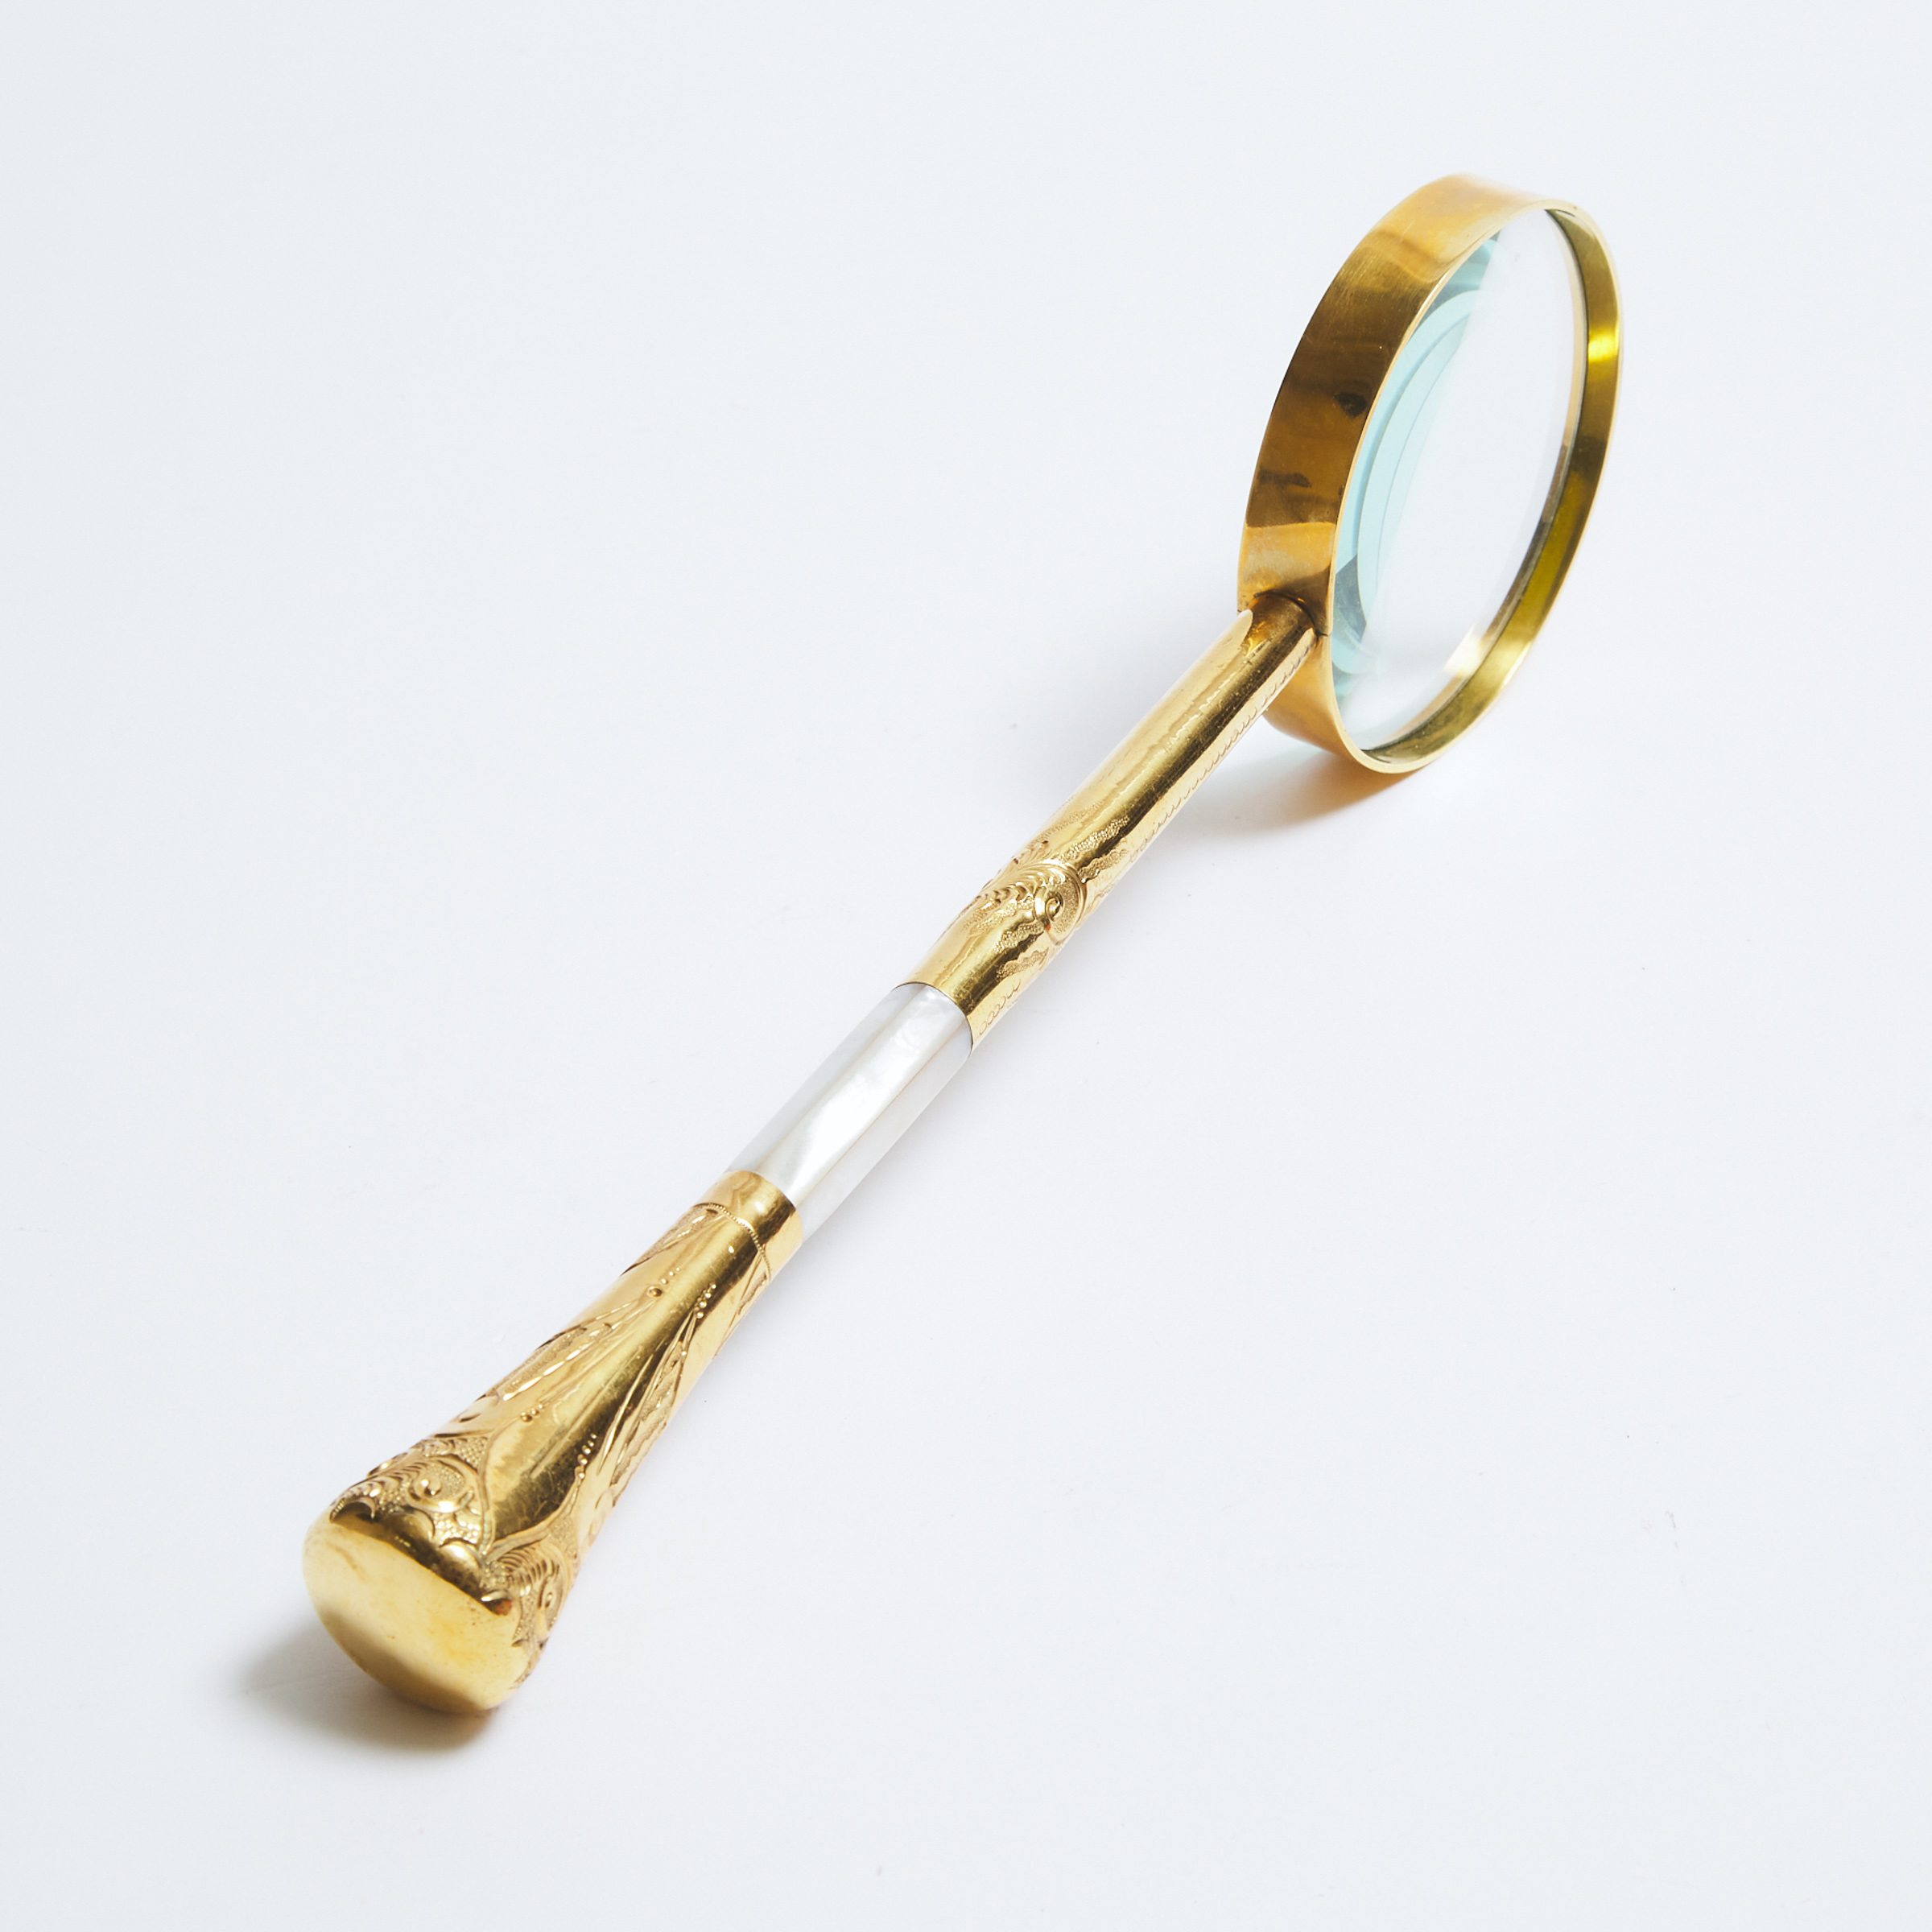 Victorian Parasol Handled Library Magnifying Glass, 19th century